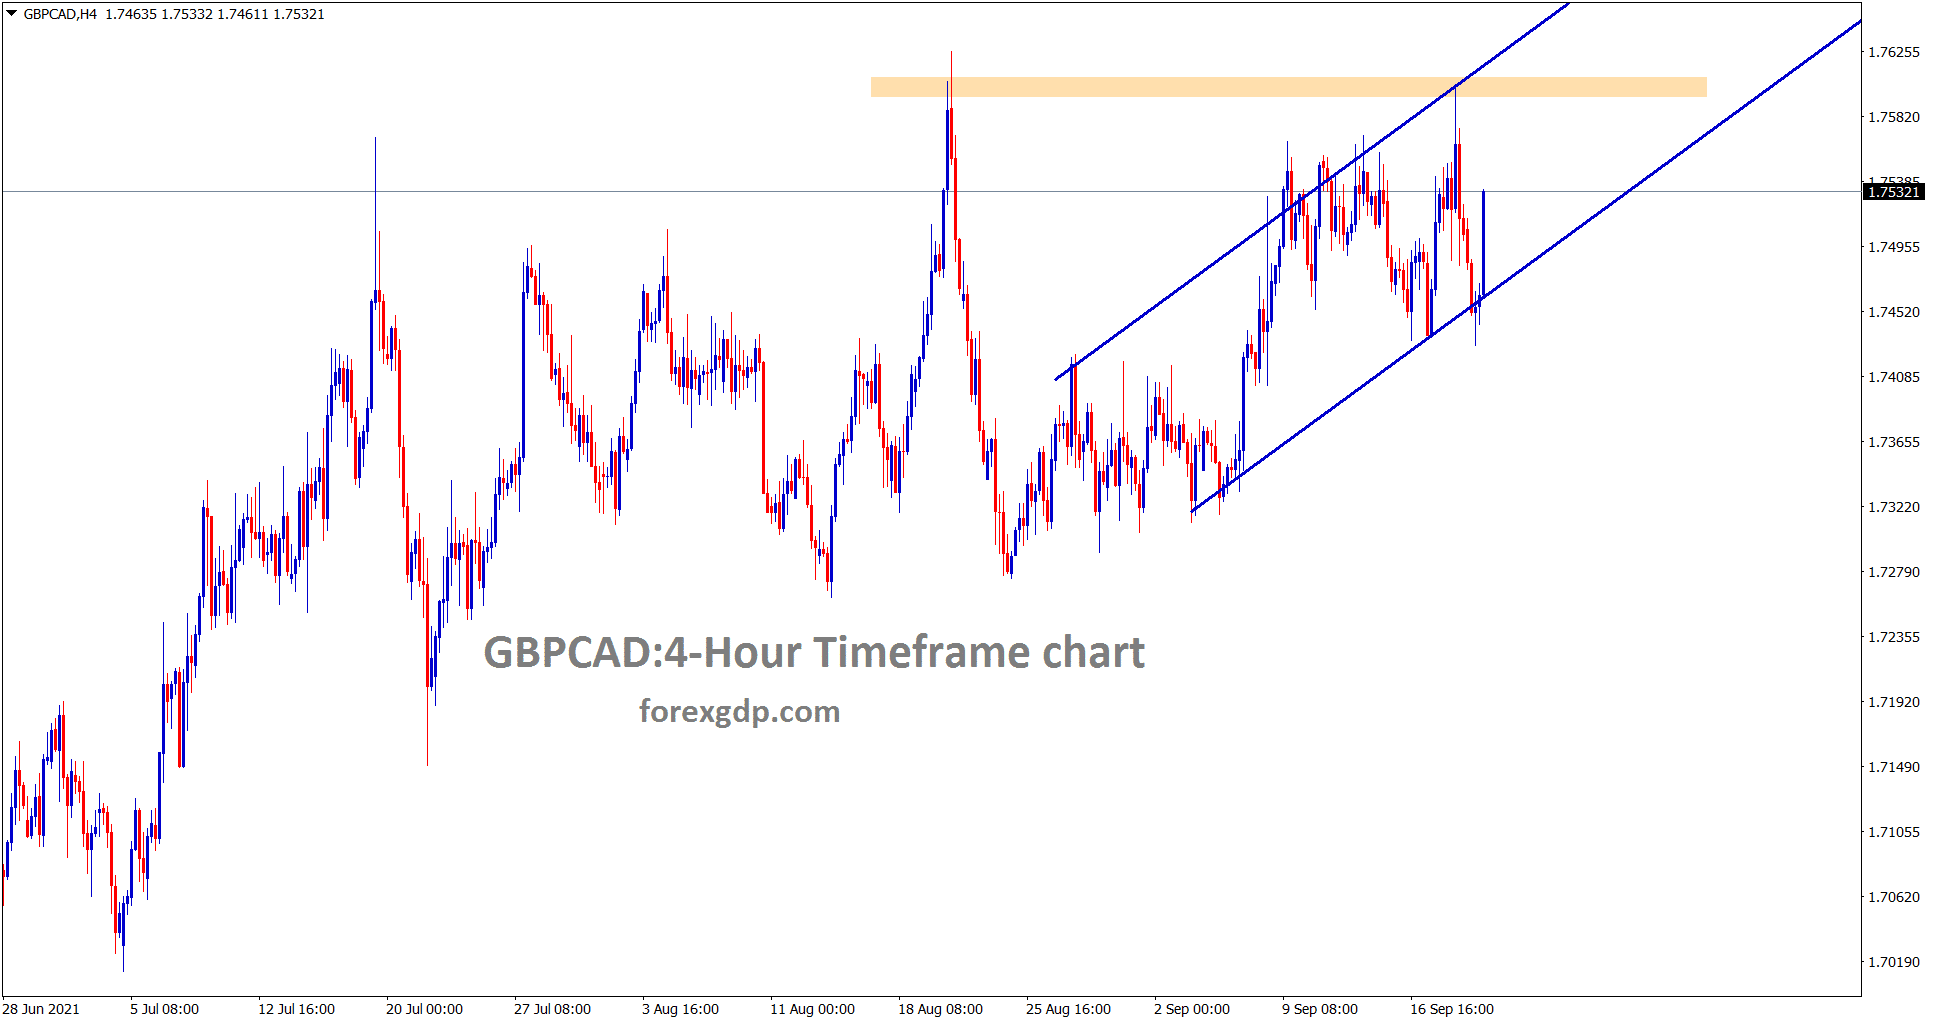 GBPCAD is still moving in an Uptrend within the channel ranges